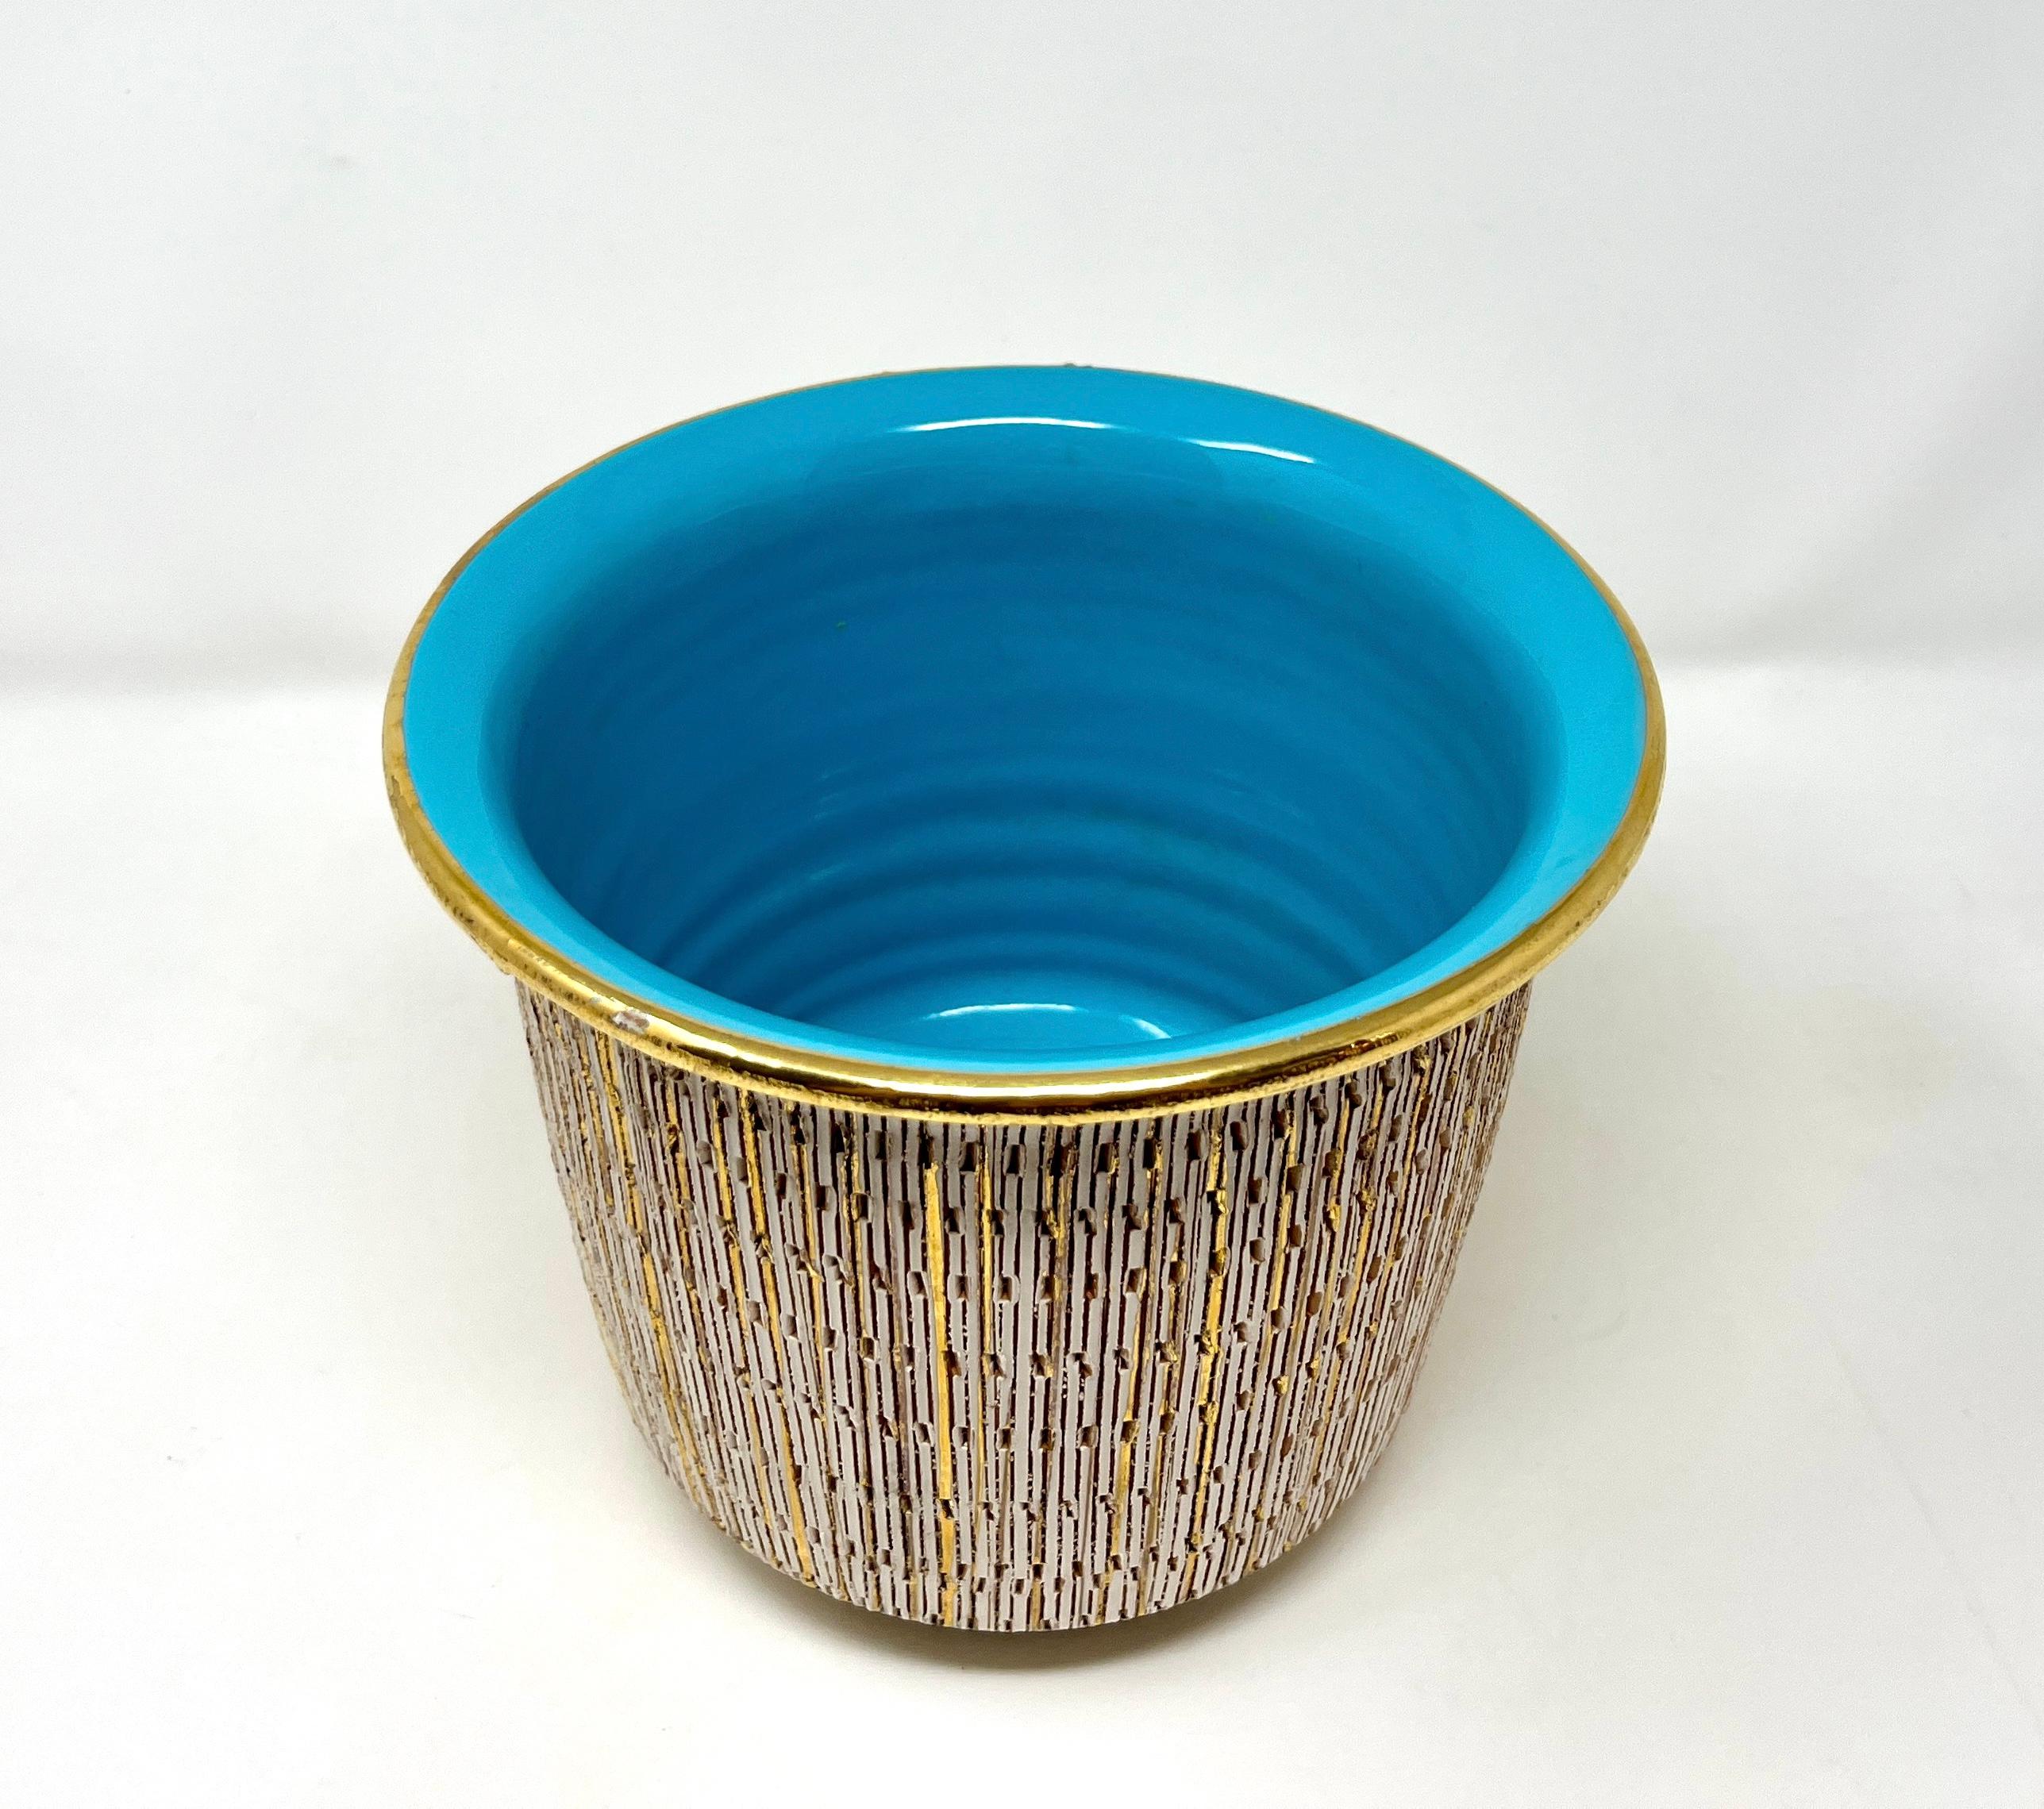 Mid-century Bitossi Pottery Seta (Silk) Vase designed by Aldo Londi and retailed by Raymor. Made in Italy and numbered on the underside. Exterior has a sgraffito incised striped pattern with a gold-leaf look. Interior is glazed in turquoise with